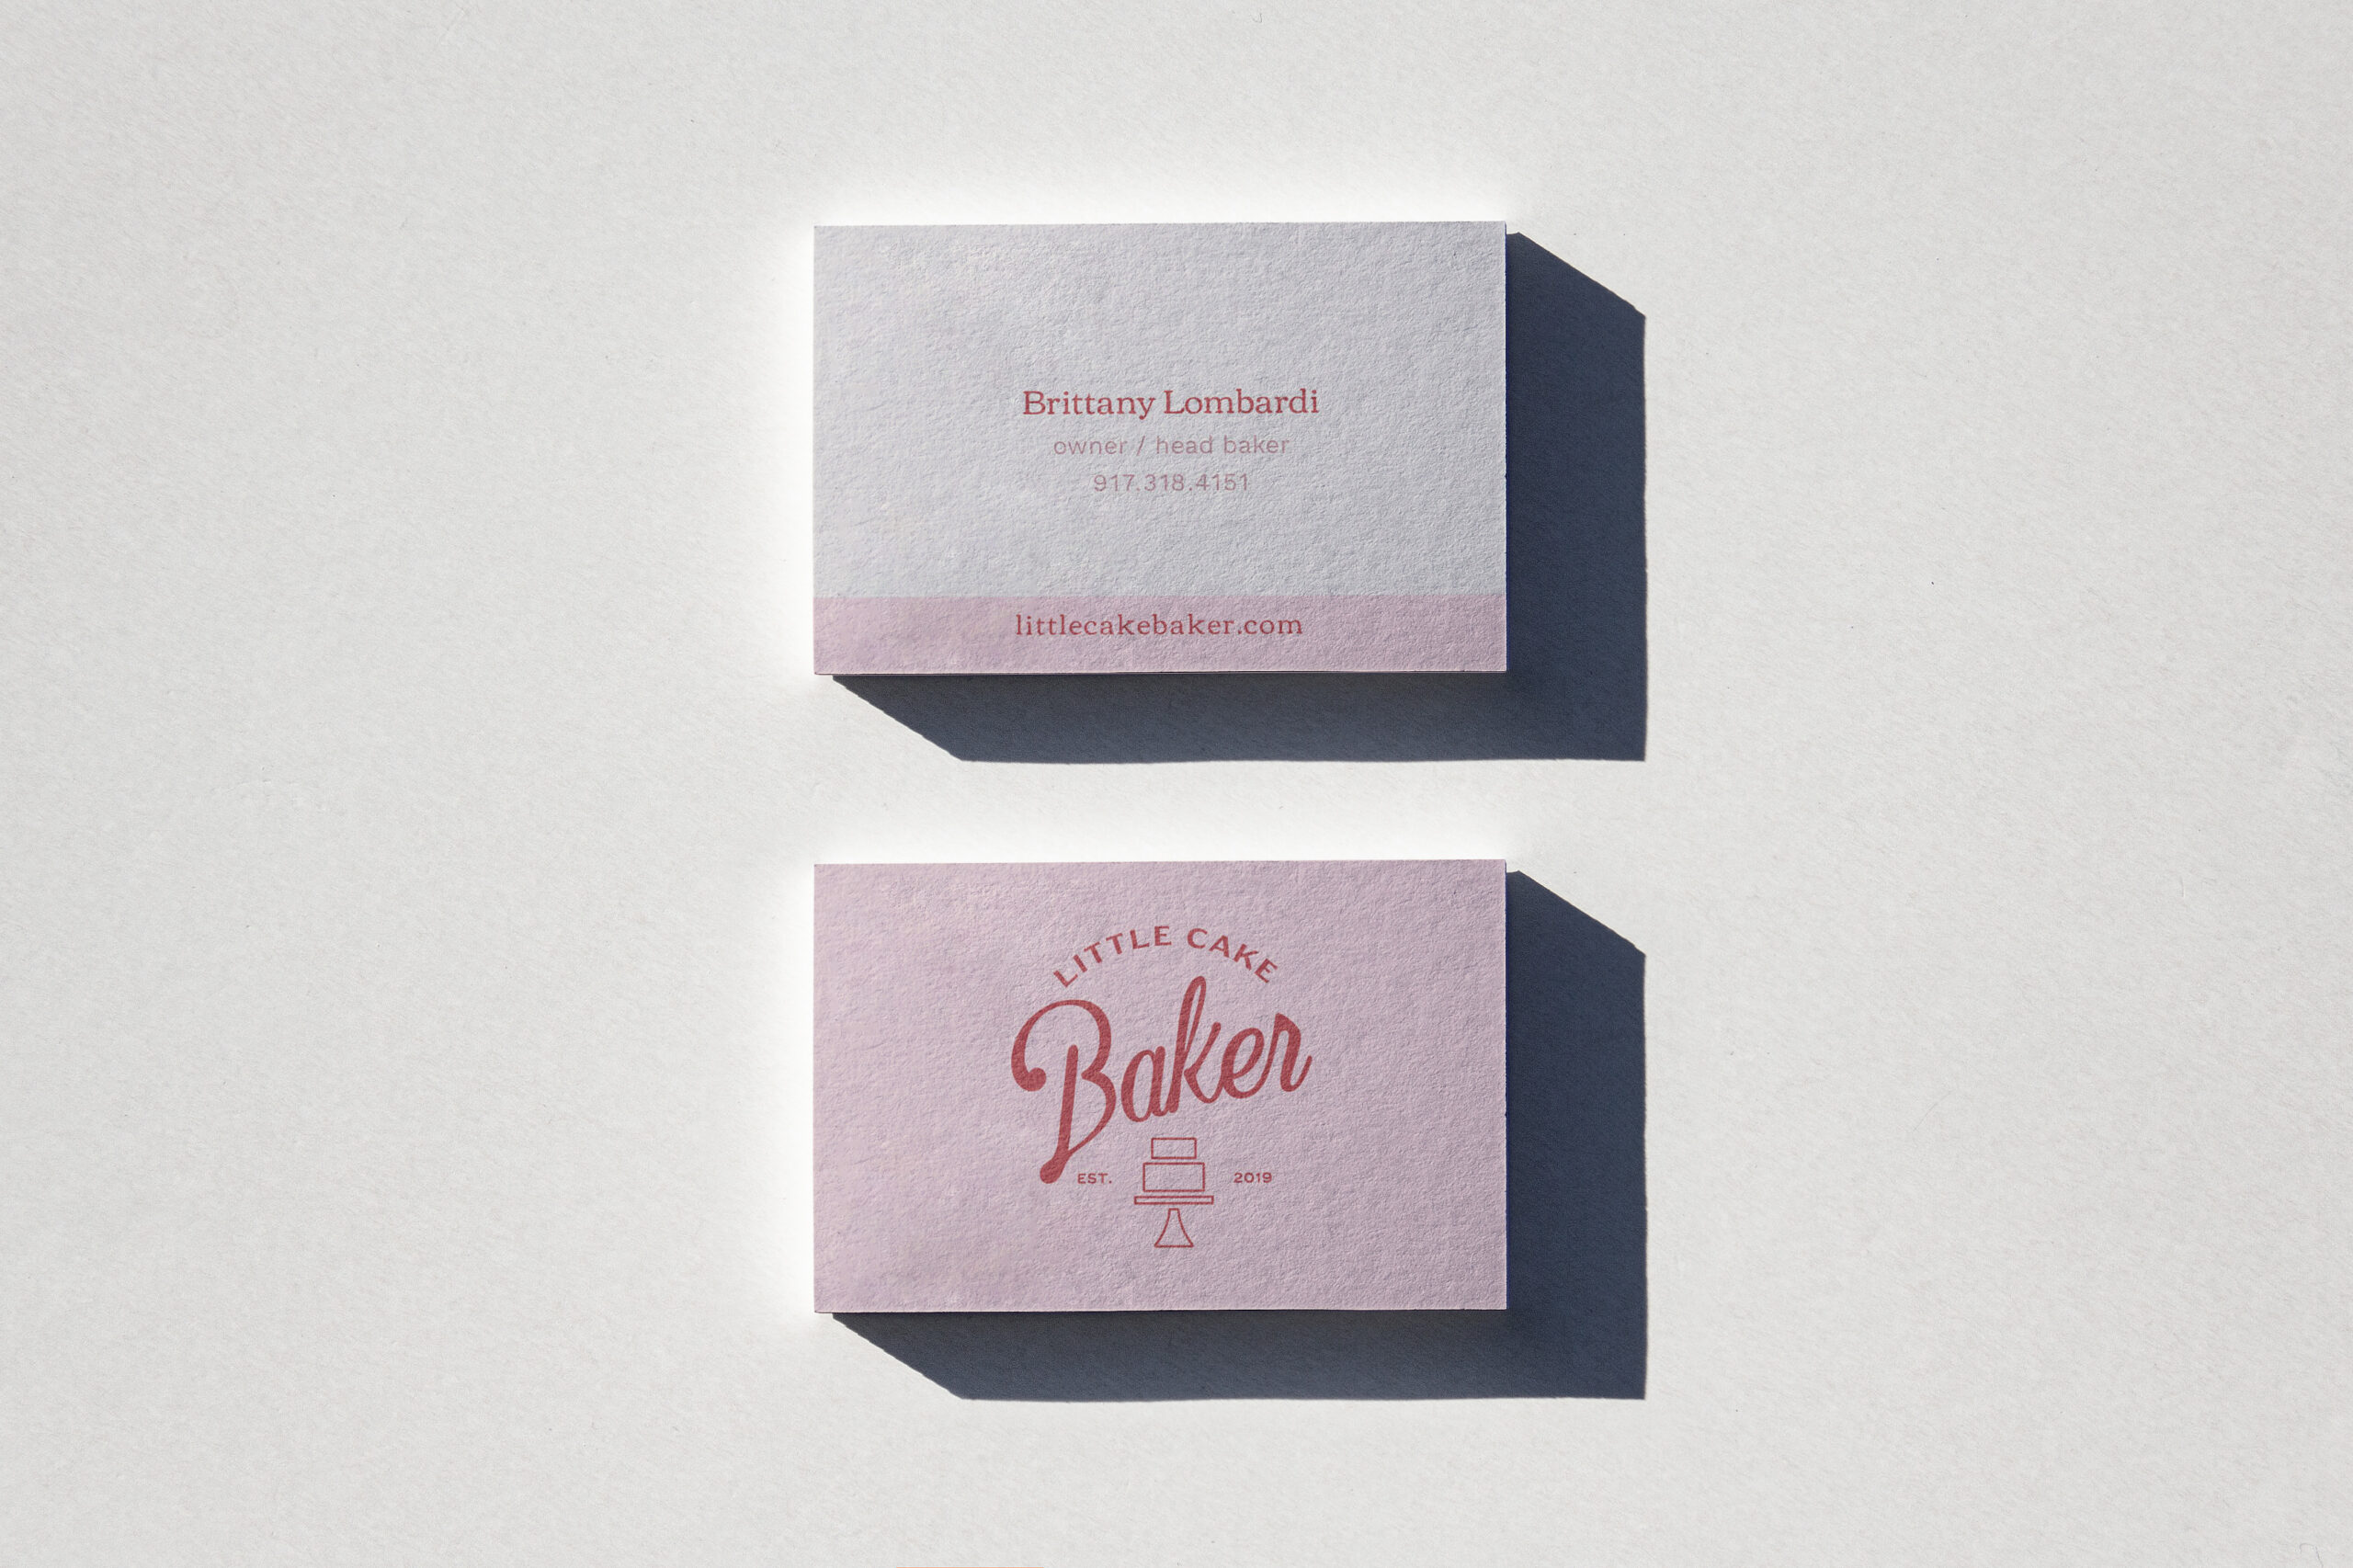 Business Card Design for Little Cake Baker Brittany Lombardi by Stellen Design branding agency and Logo design firm in Los Angeles California